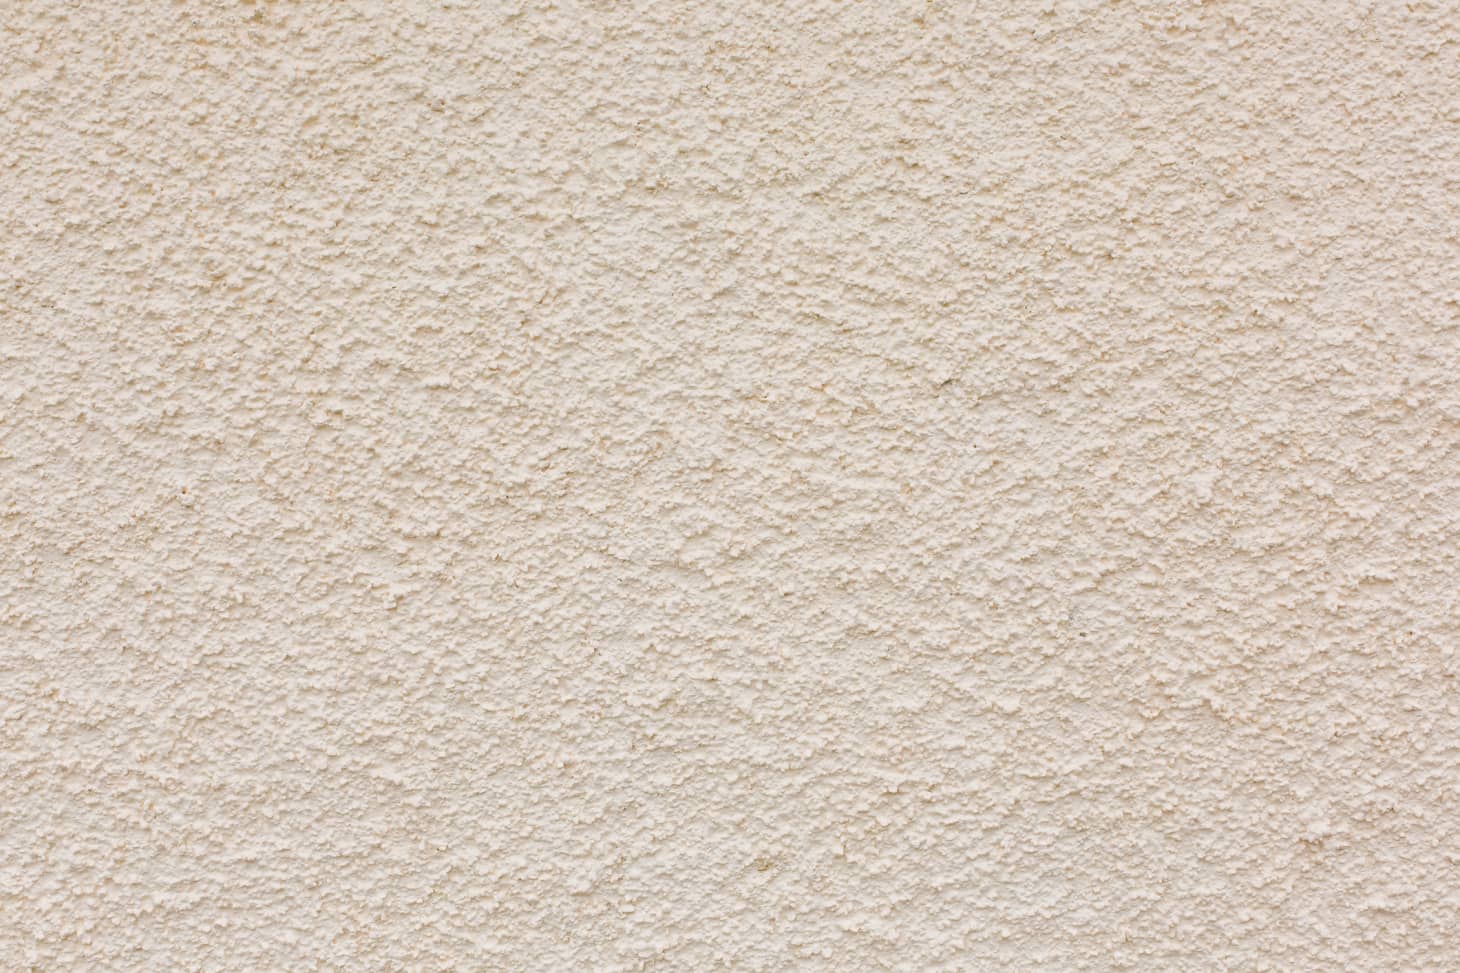 How To Paint A Popcorn Ceiling Apartment Therapy